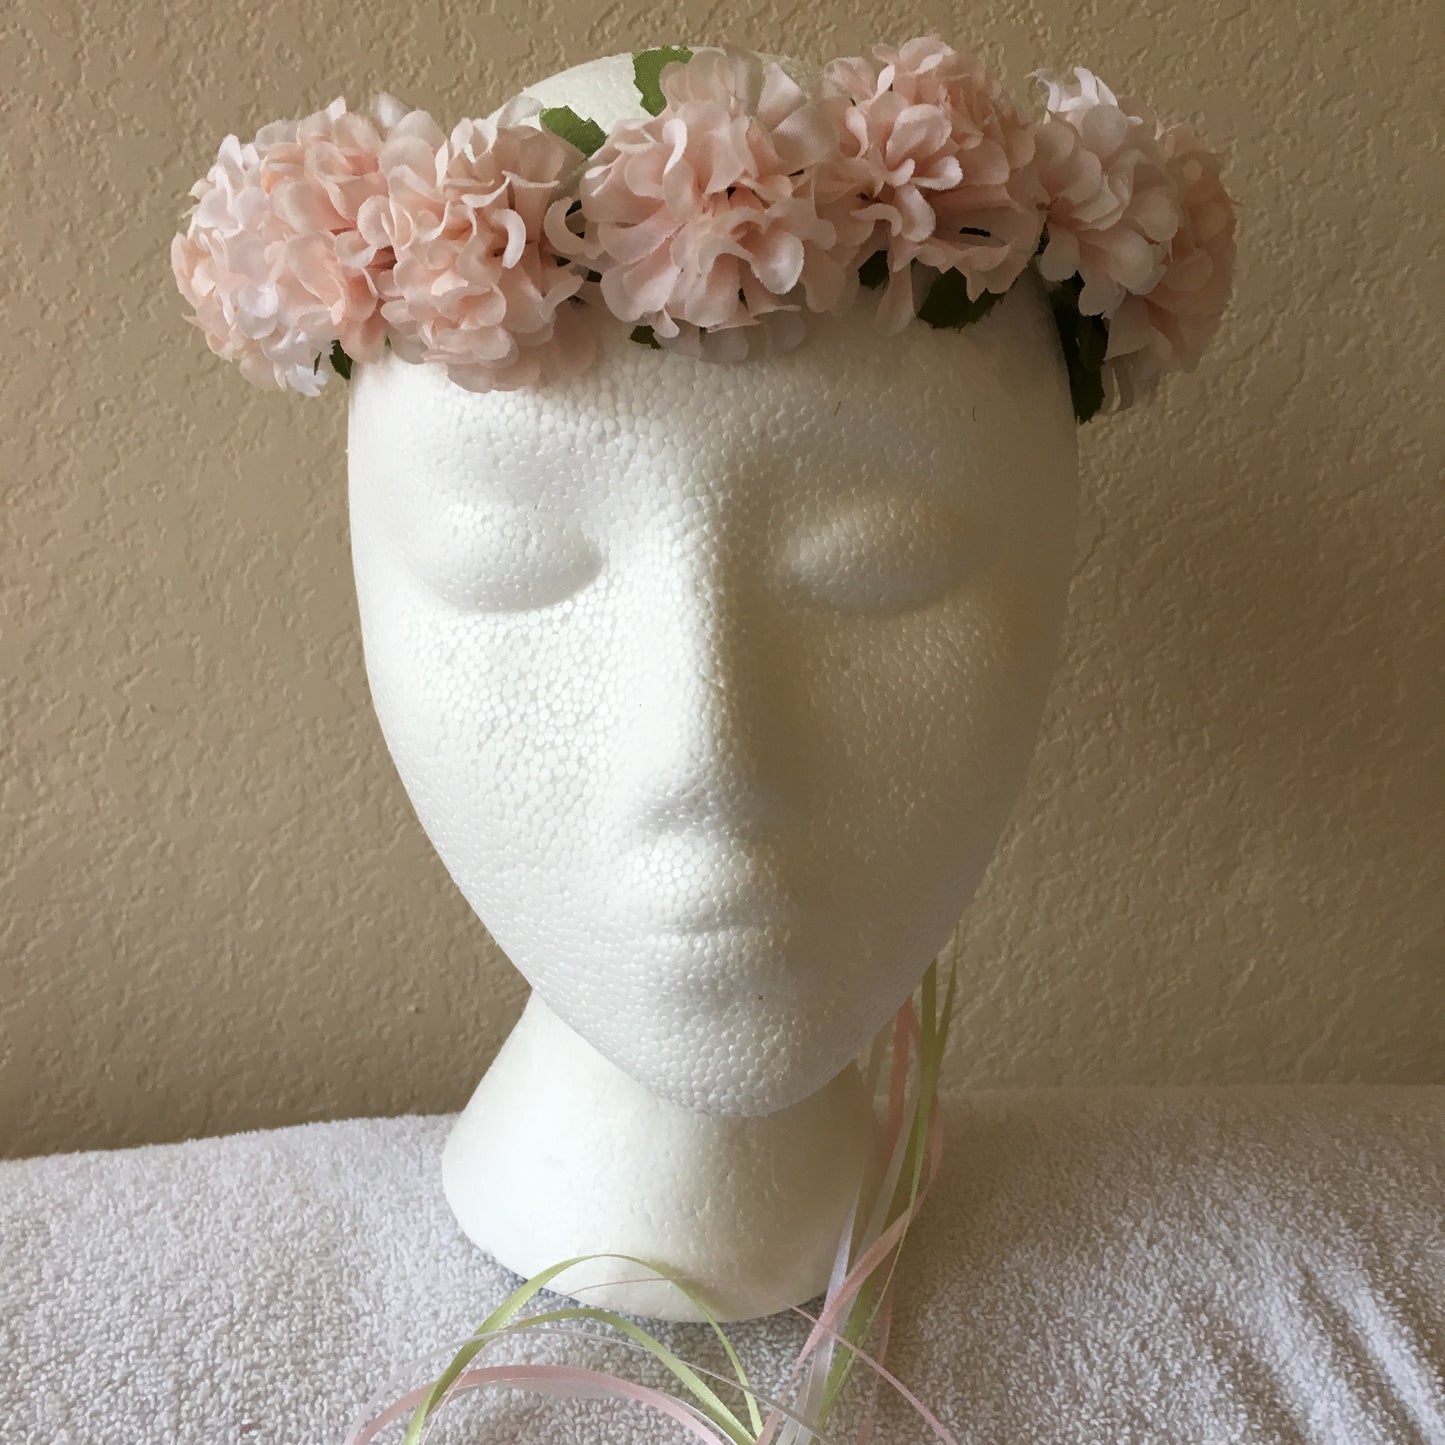 Small Wreath -  Pale pink pom poms